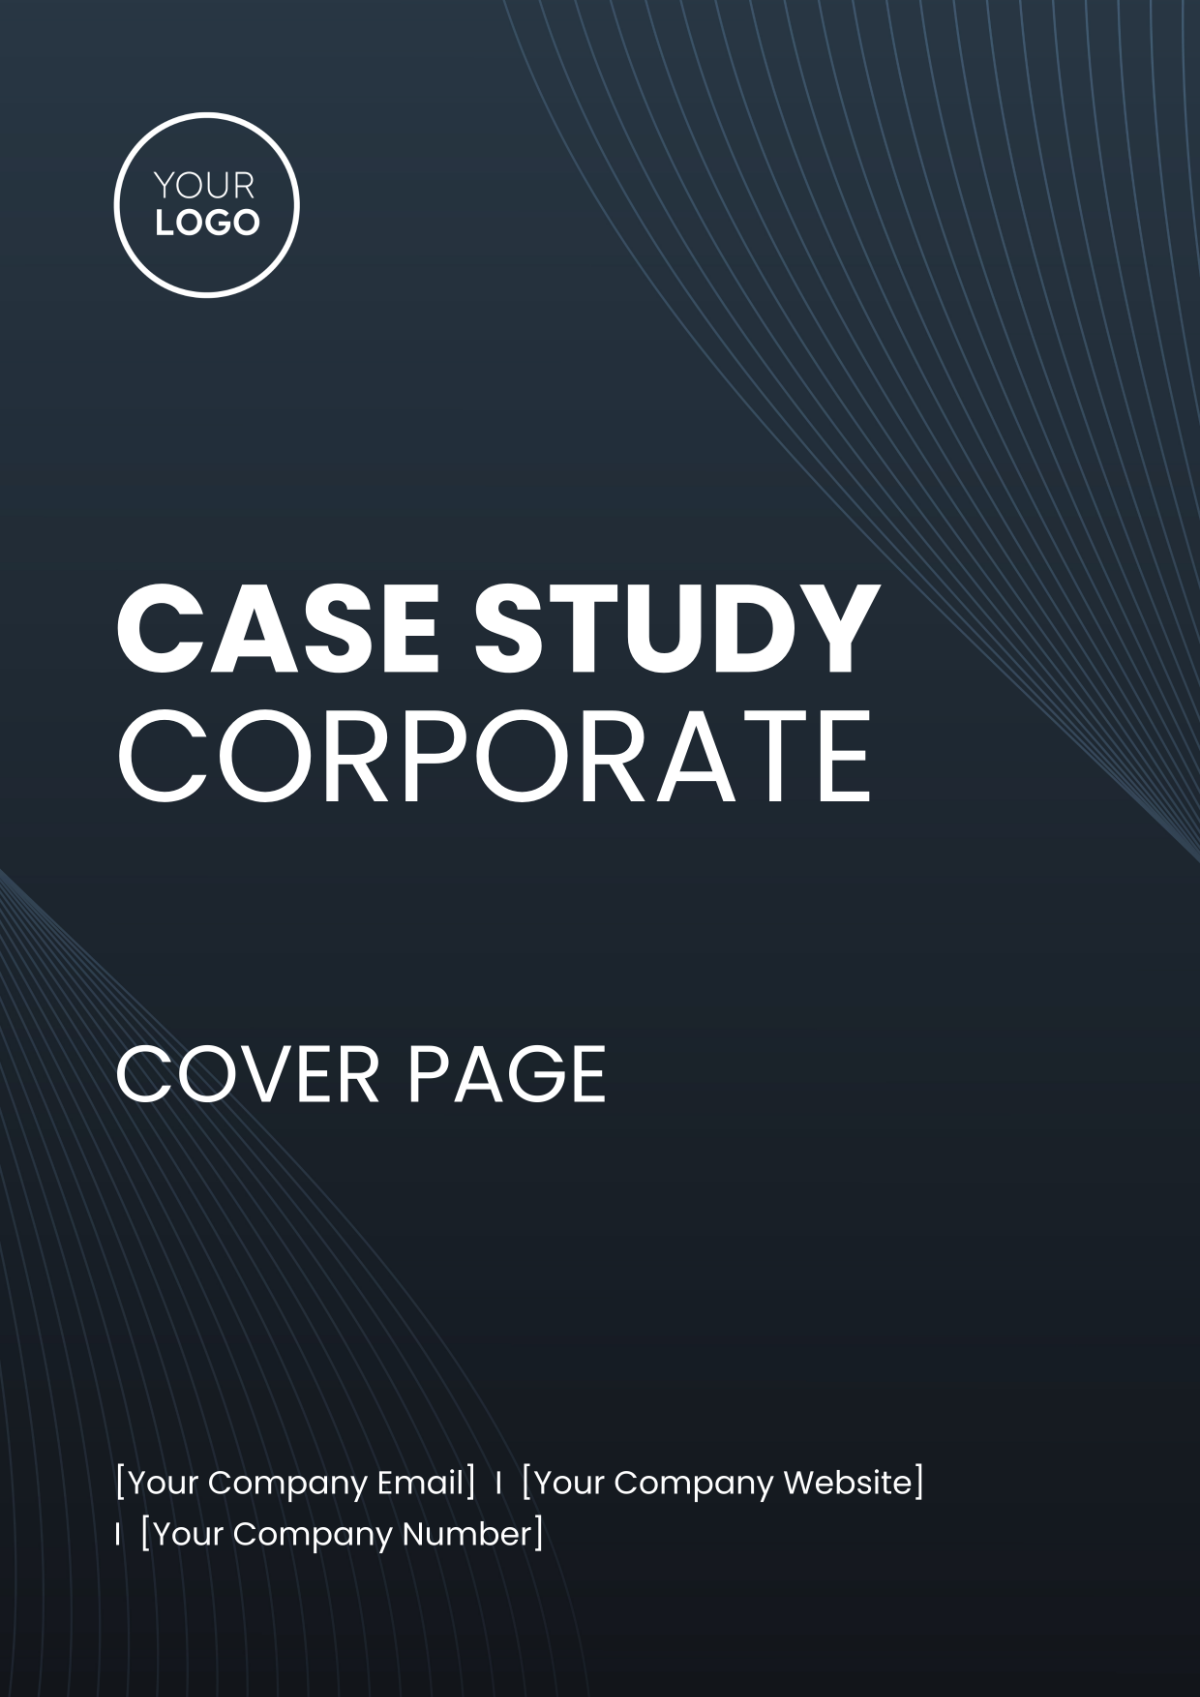 Case Study Corporate Cover Page